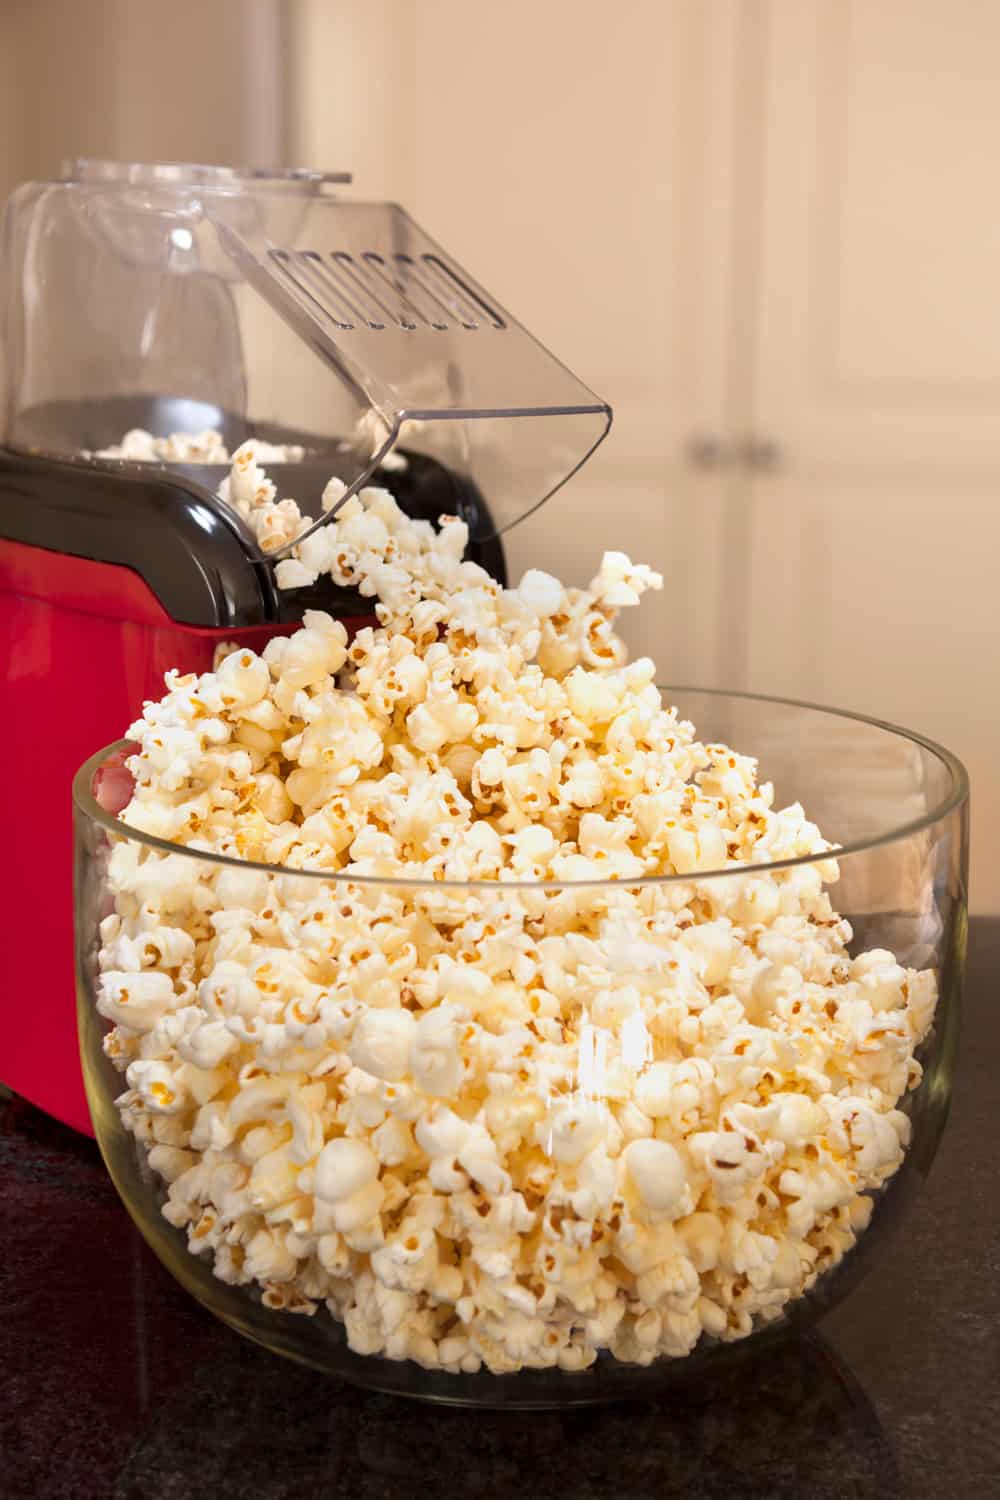 Bowl of popcorn with popcorn machine on a kitchen bench. Healthy home-made snacking.